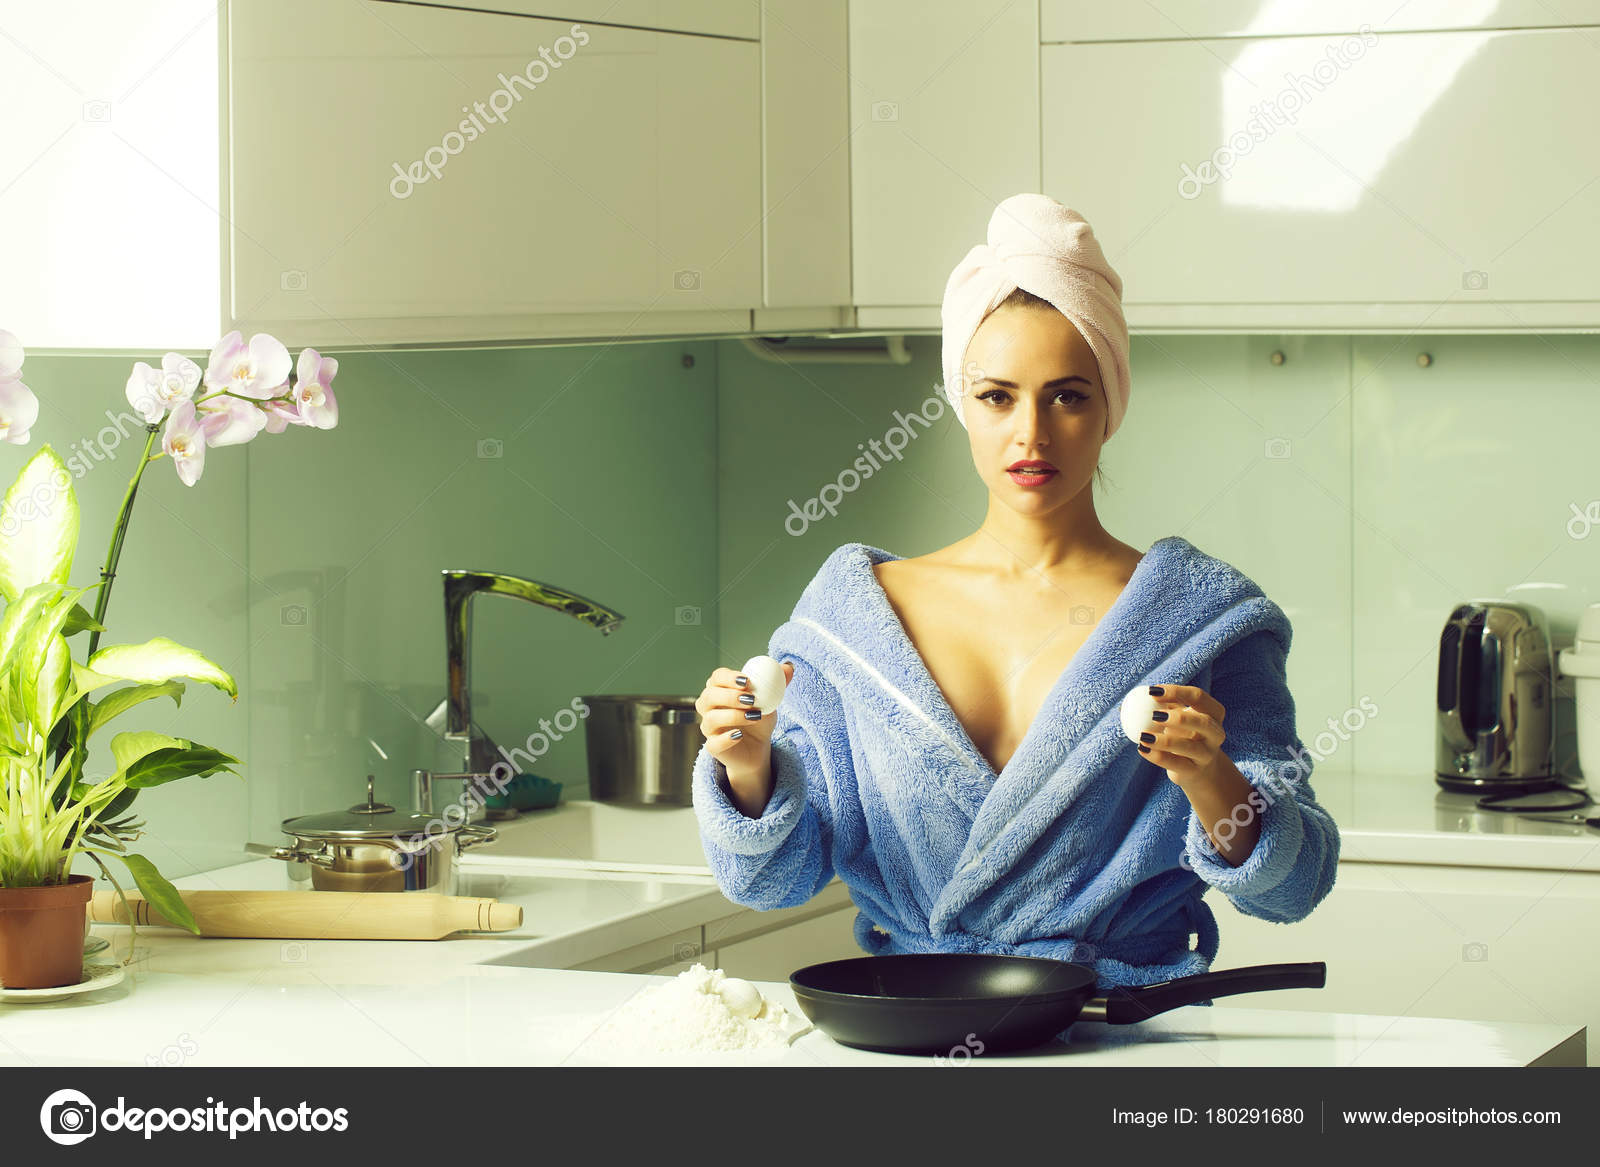 One Sexual Beautiful Sensual Female Housewife Blue Terry Dressing Gown Stock Photo by ©Tverdohlib 180291680 Adult Picture